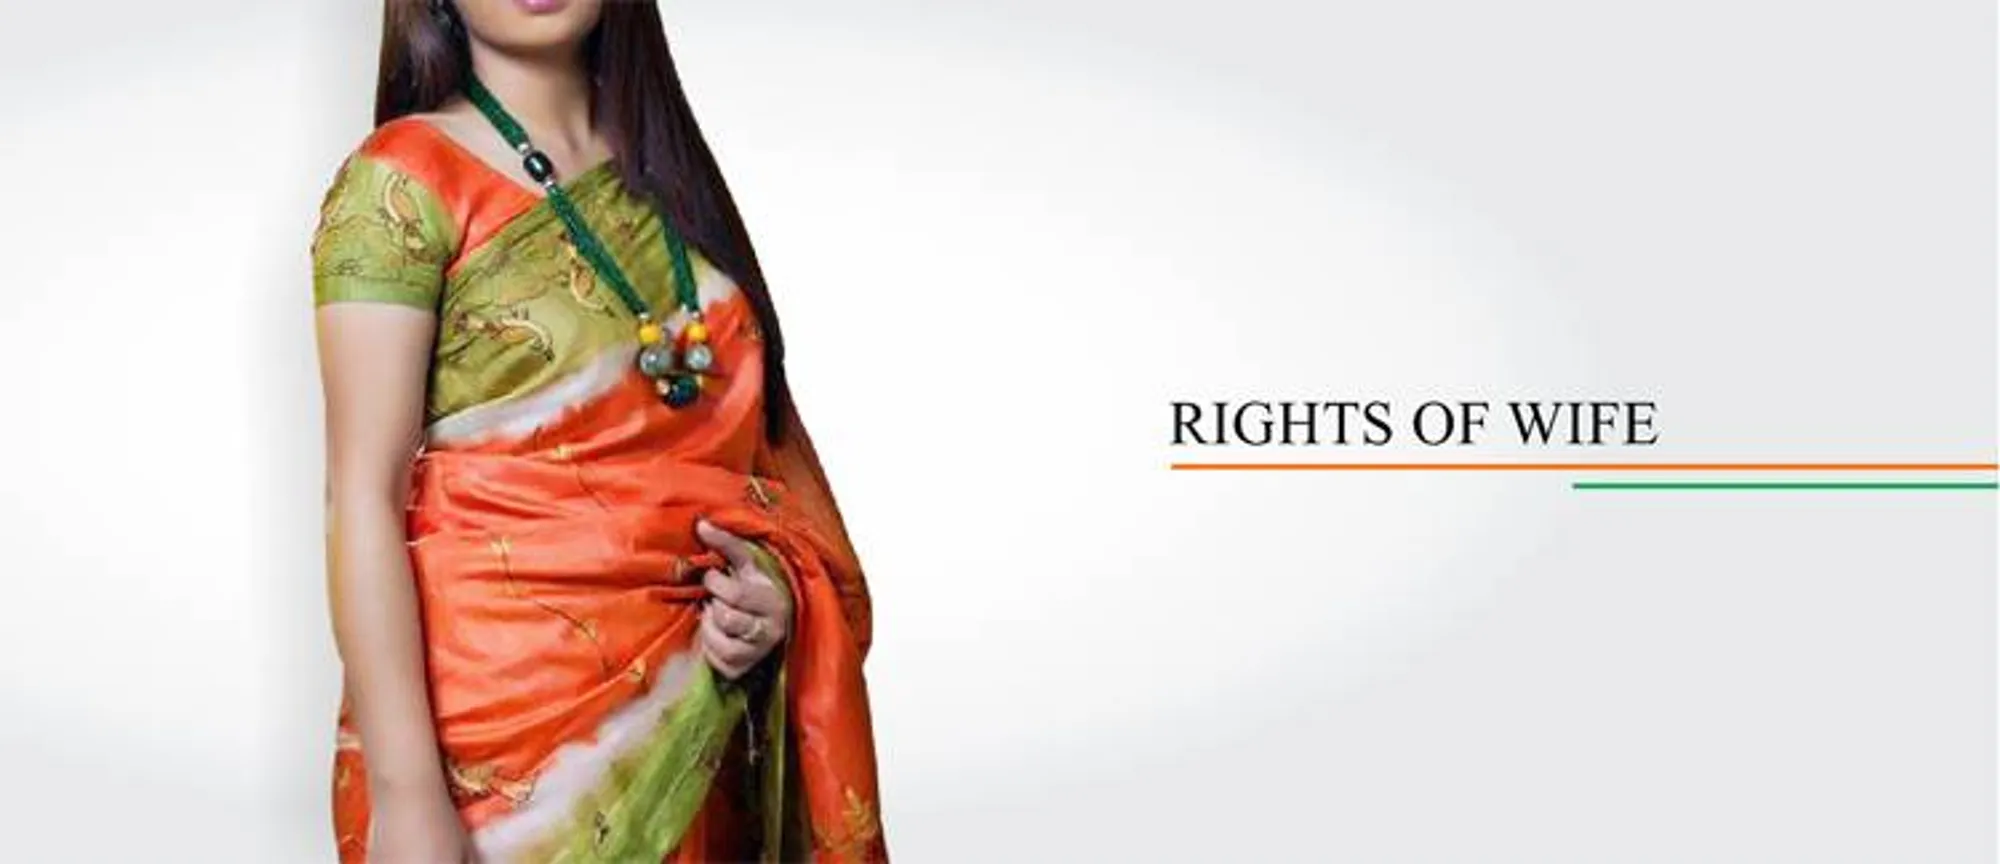 Legal Rights of wife in India